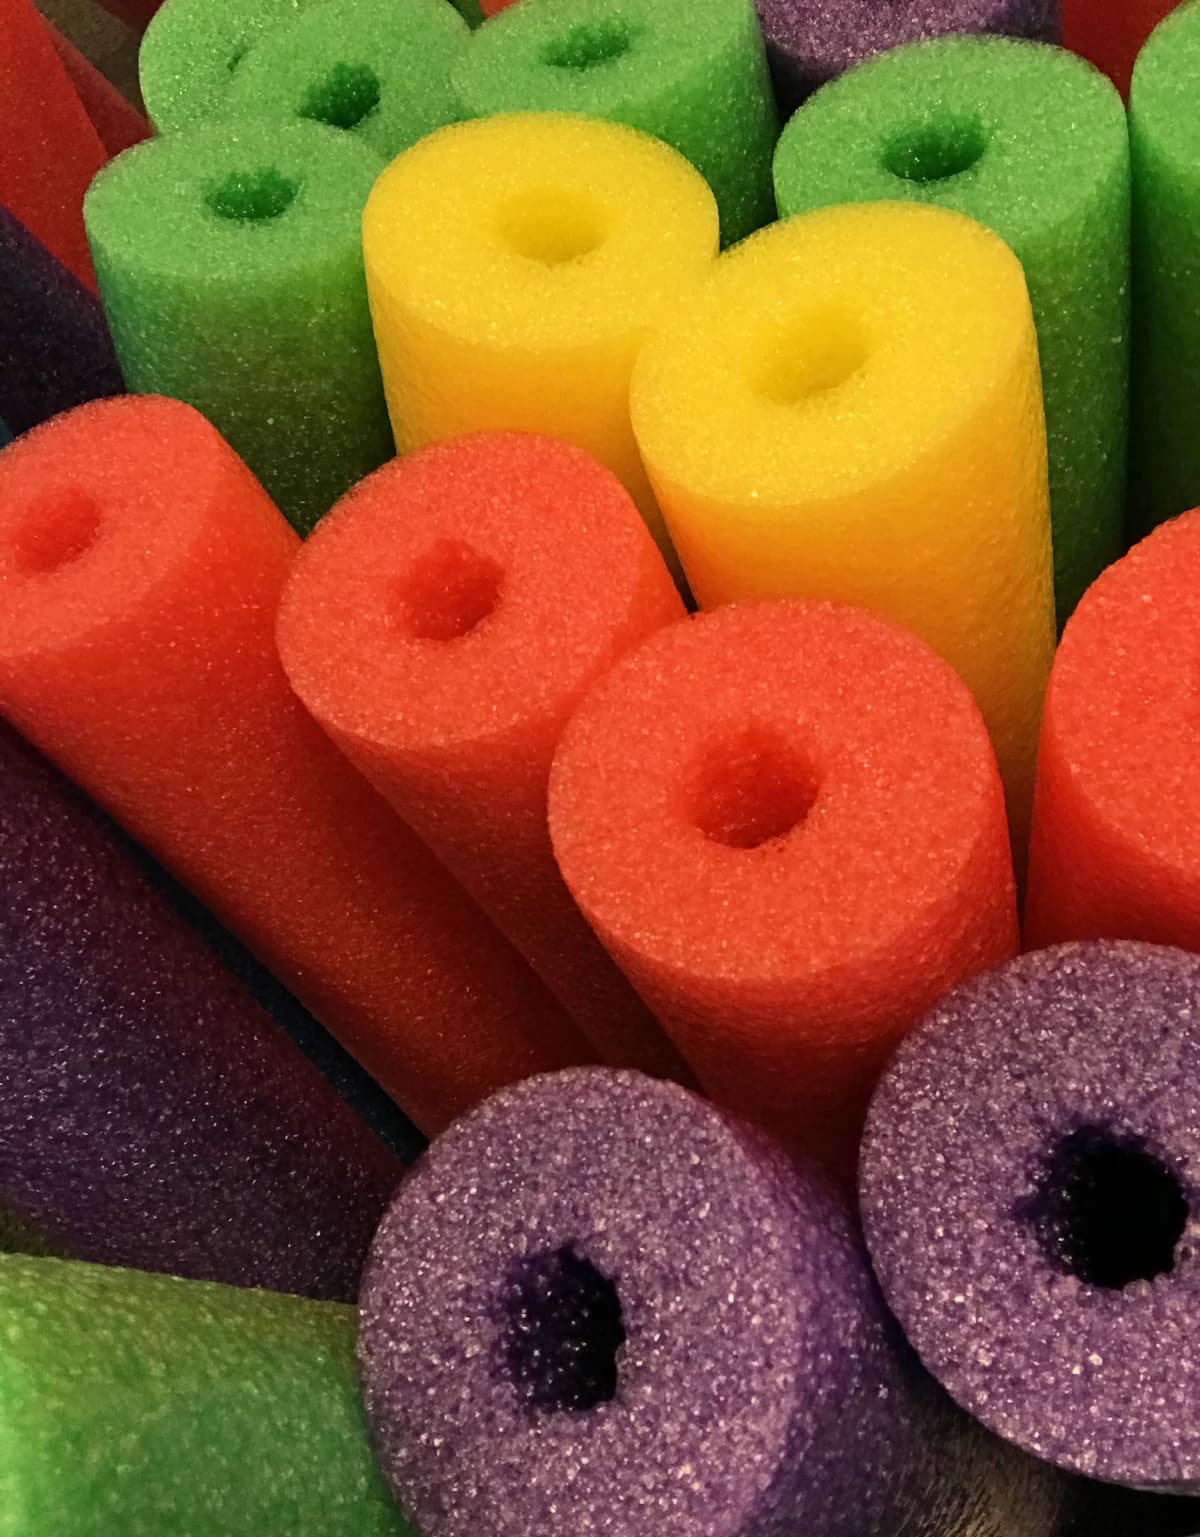 Foam swimming pool noodles in vibrant colors.